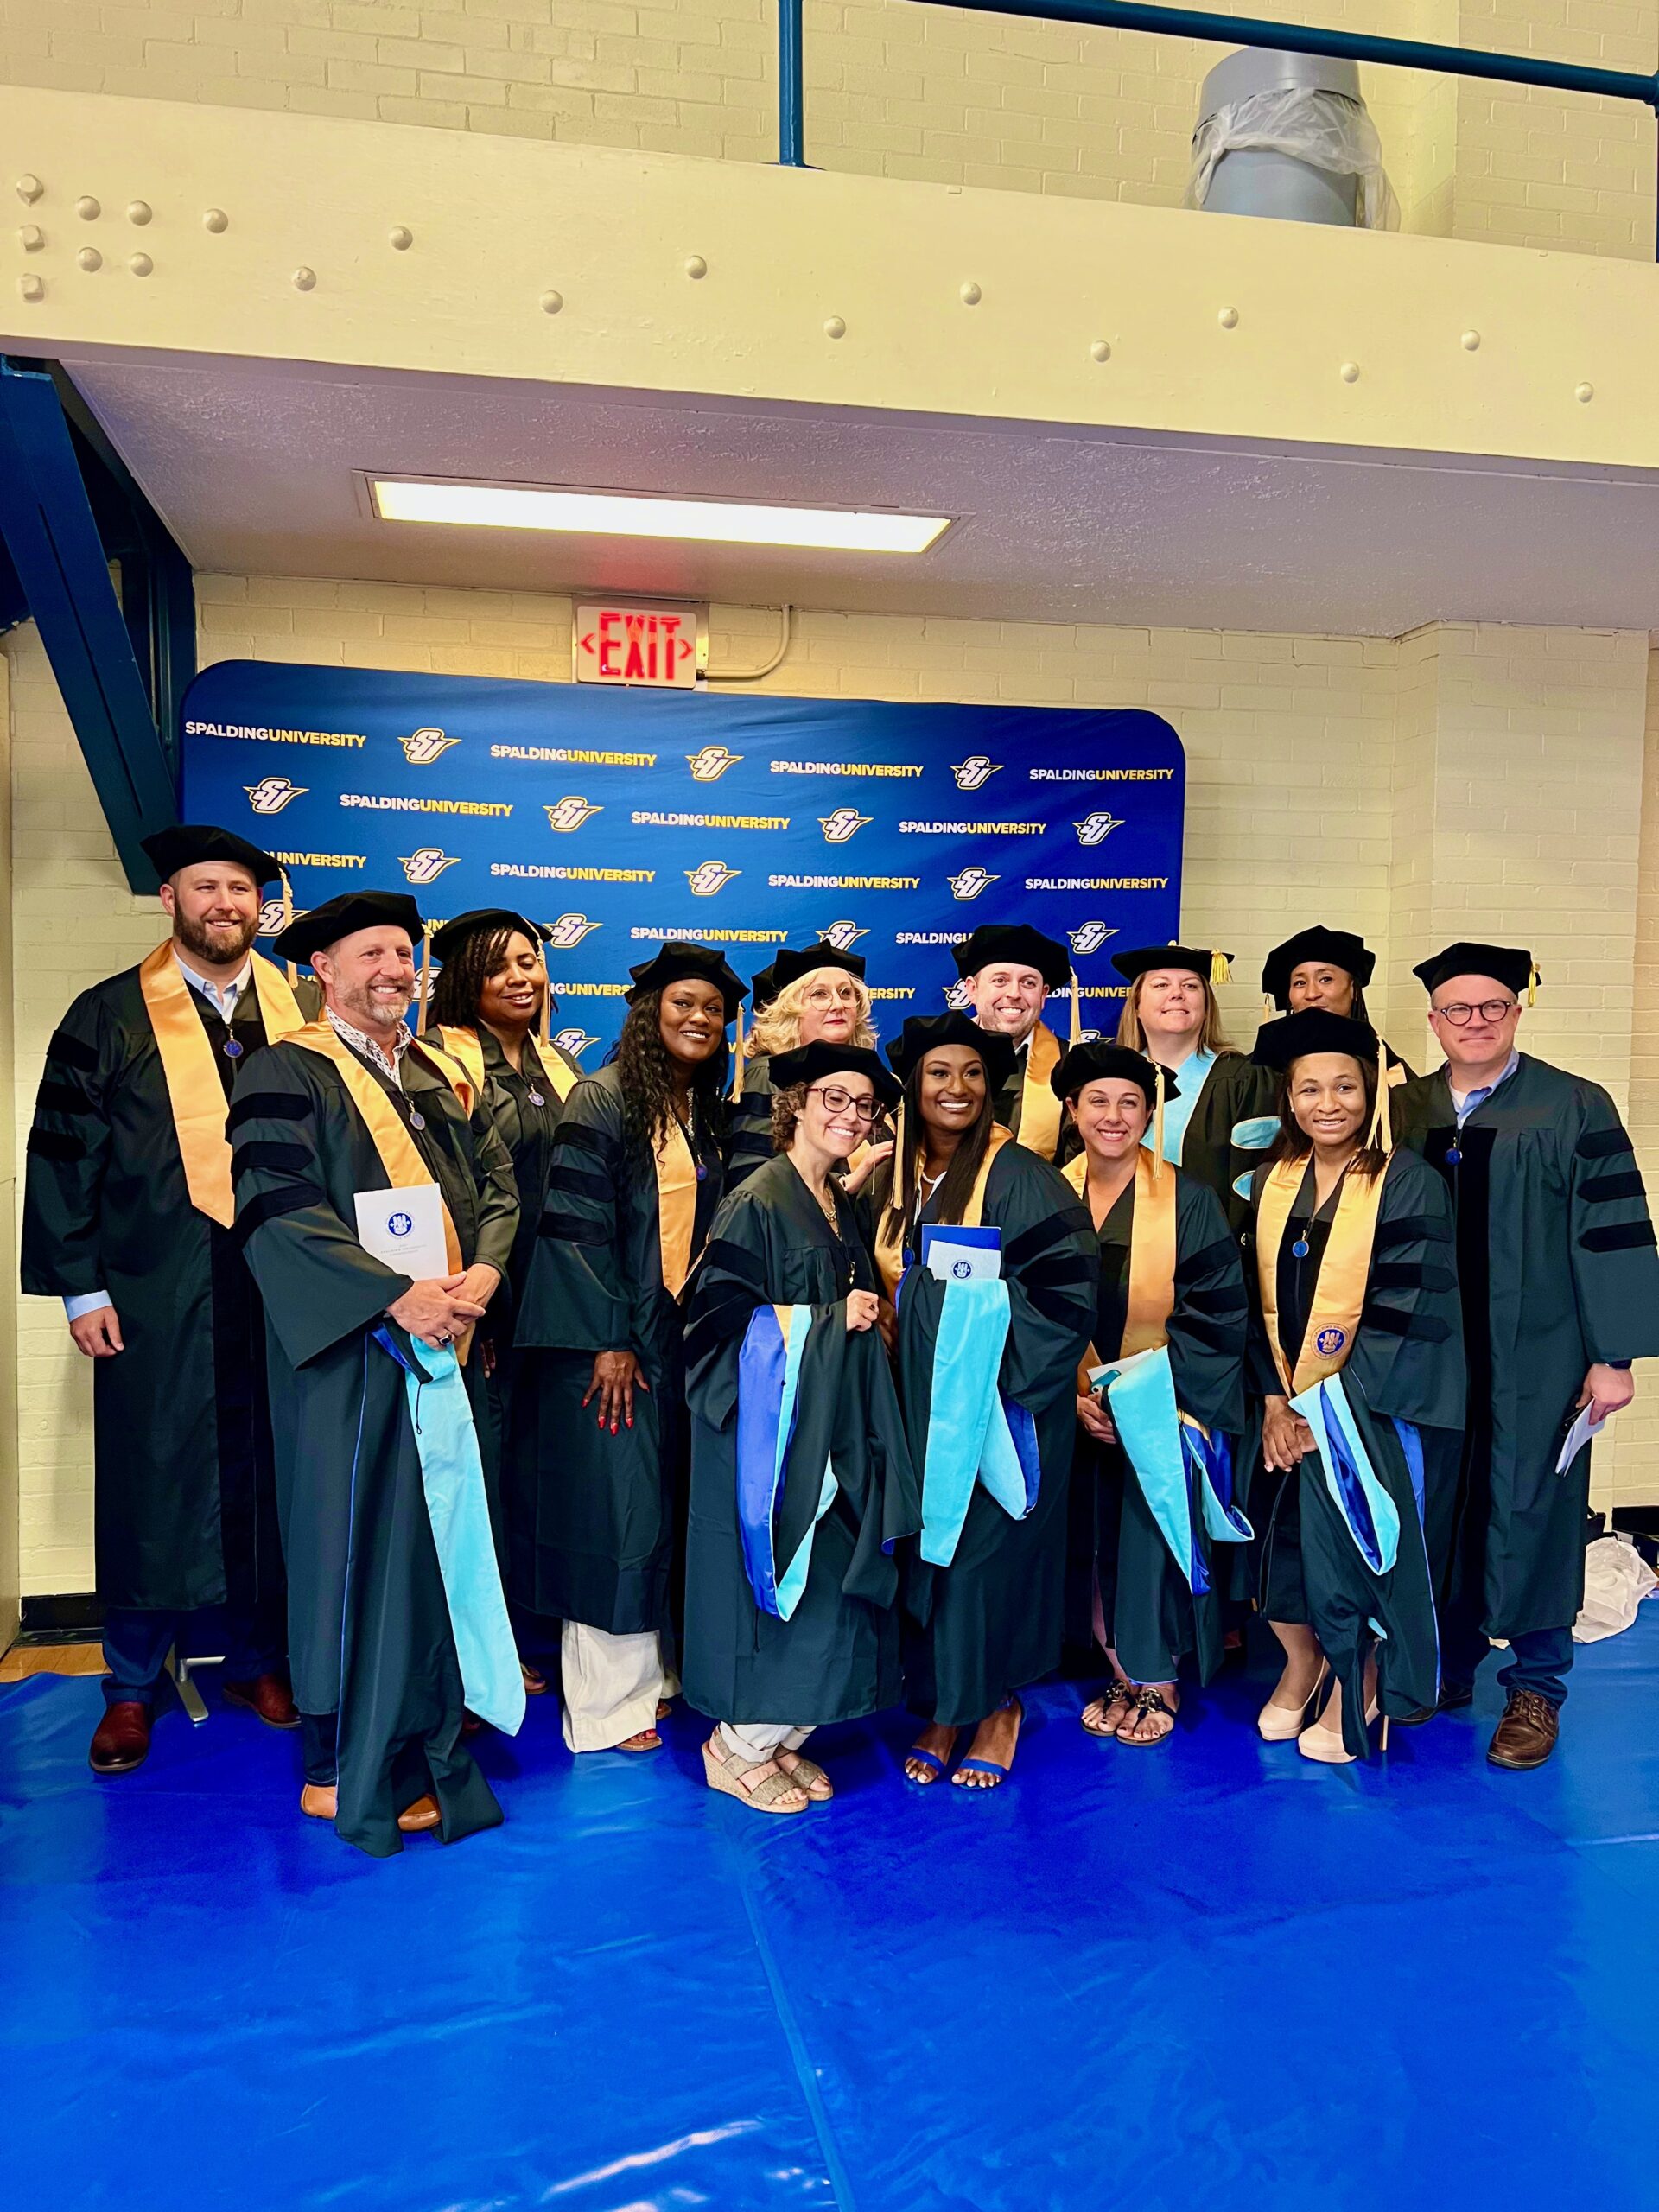 Group of Spalding master's graduates posing for picture in Columbia Gym with Spalding Athletics backdrop